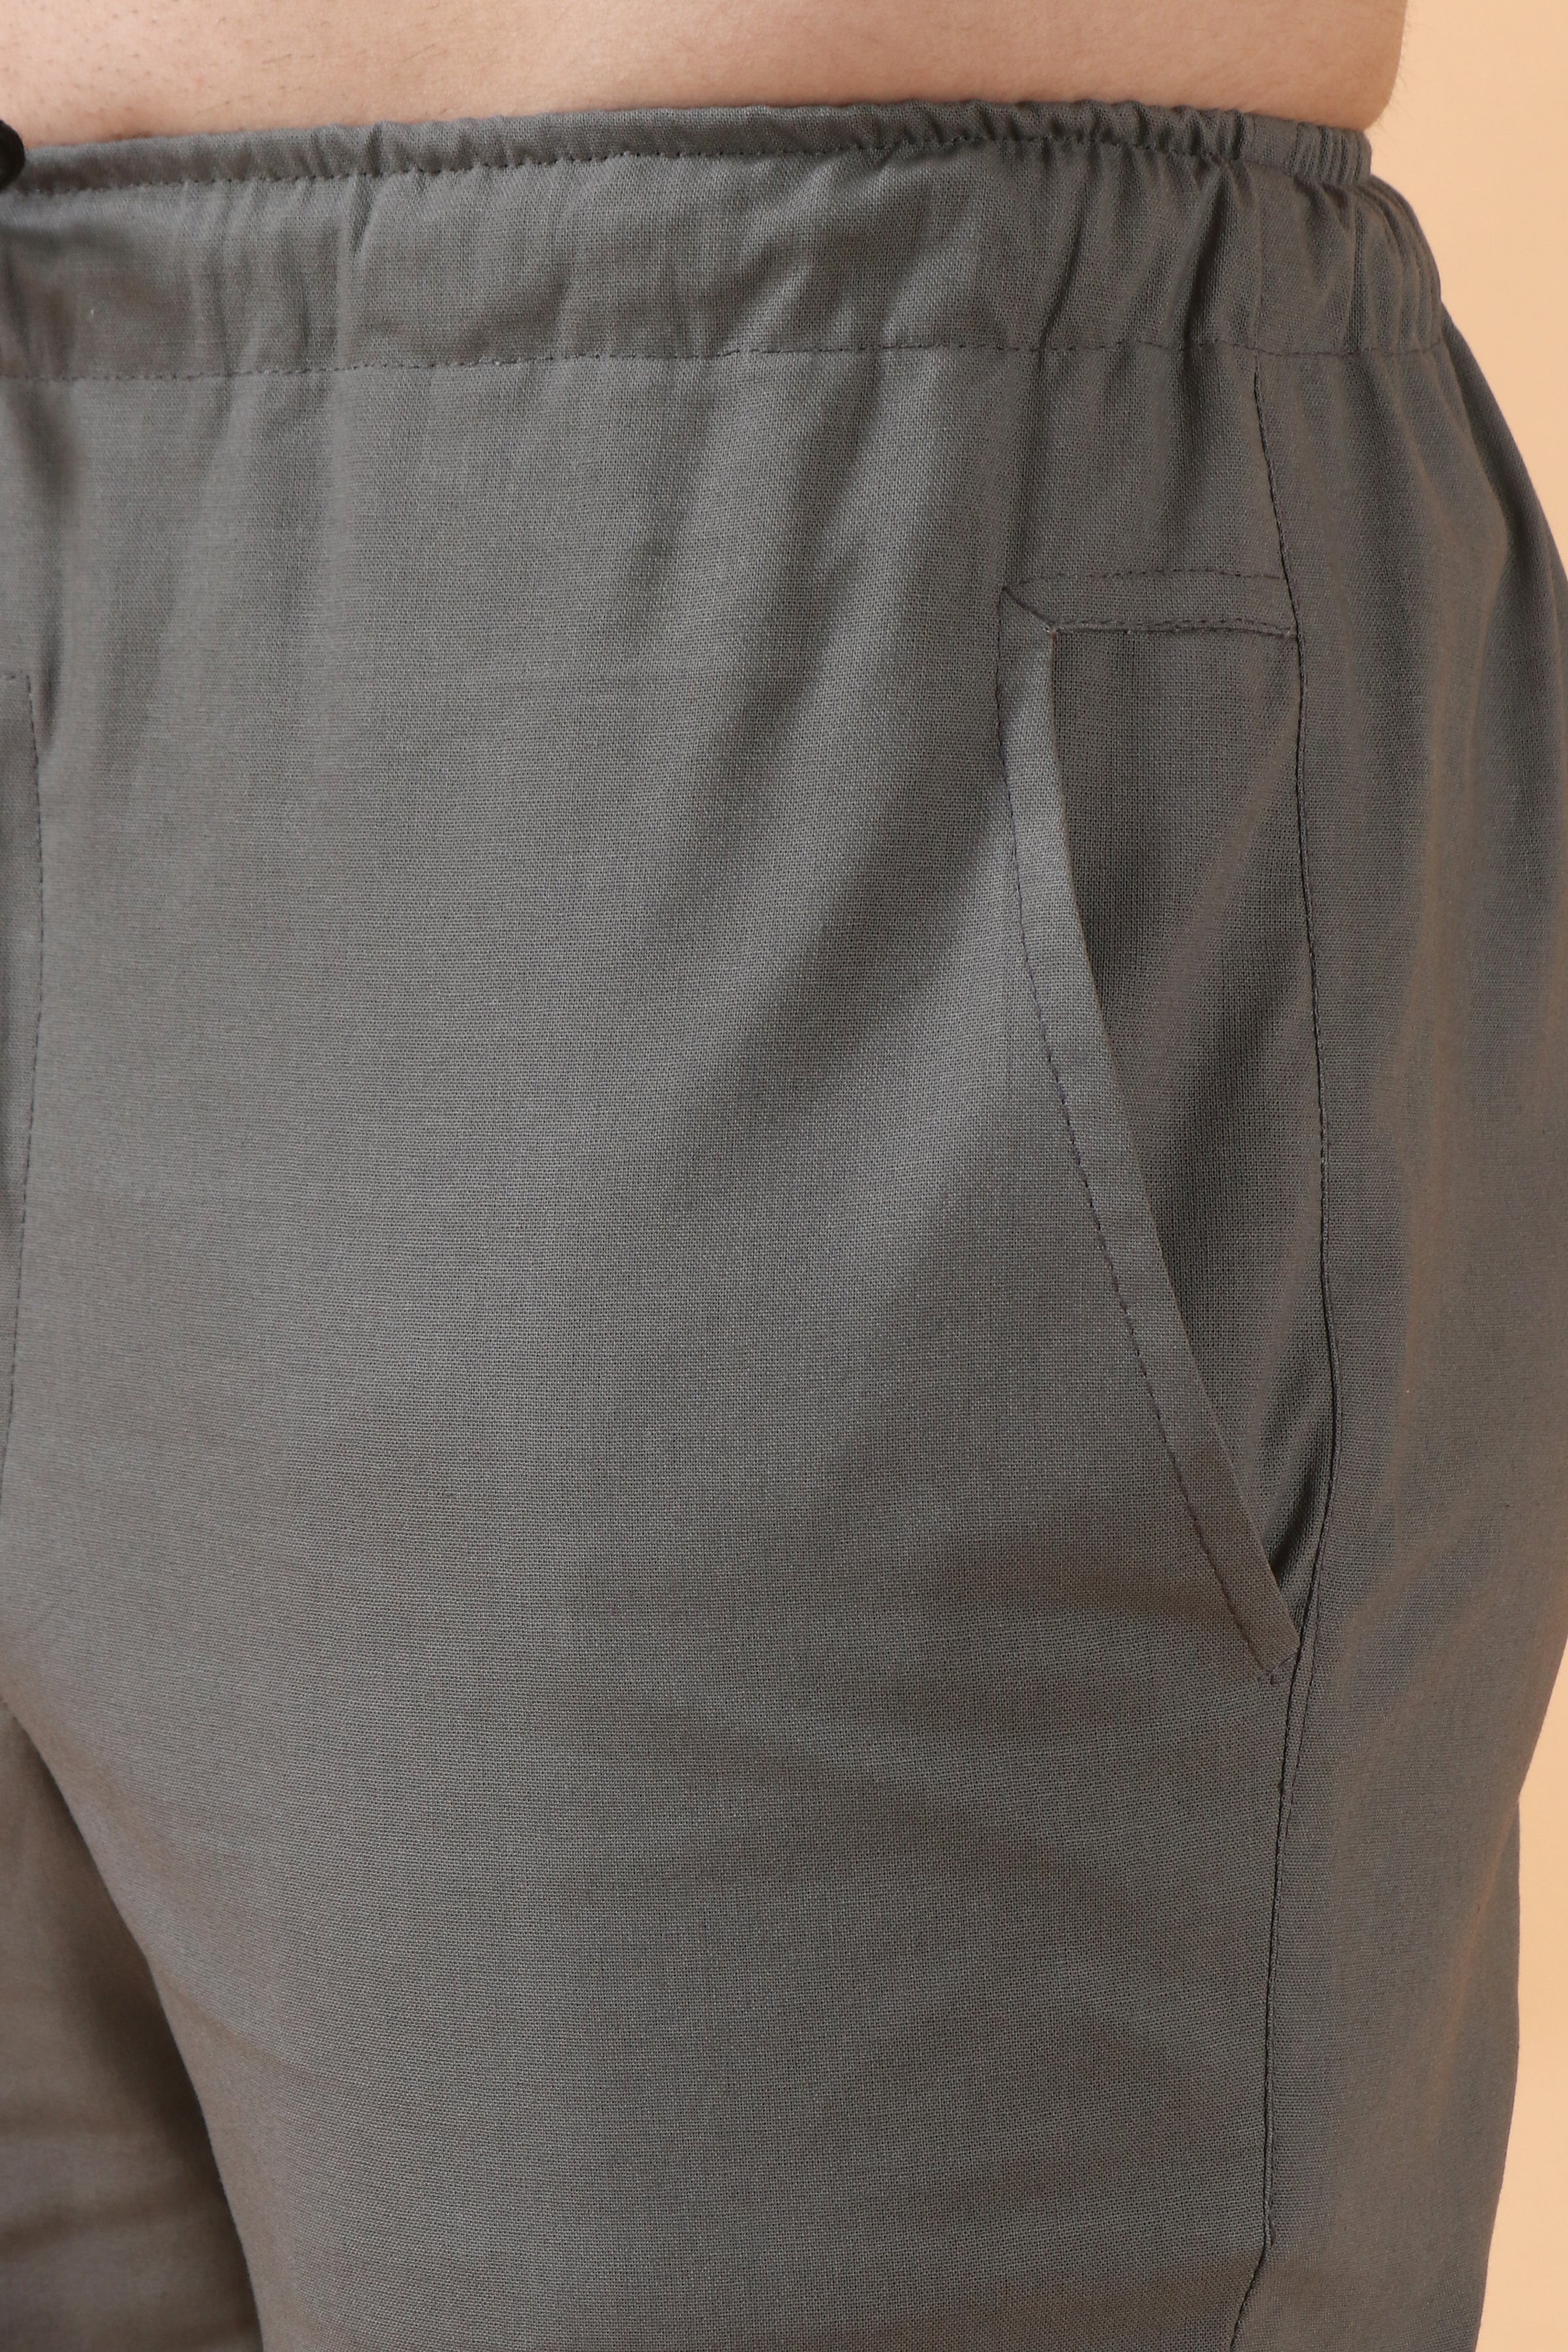 Buy online Grey Solid Cargo Trousers from Bottom Wear for Men by Beevee for  1099 at 50 off  2023 Limeroadcom